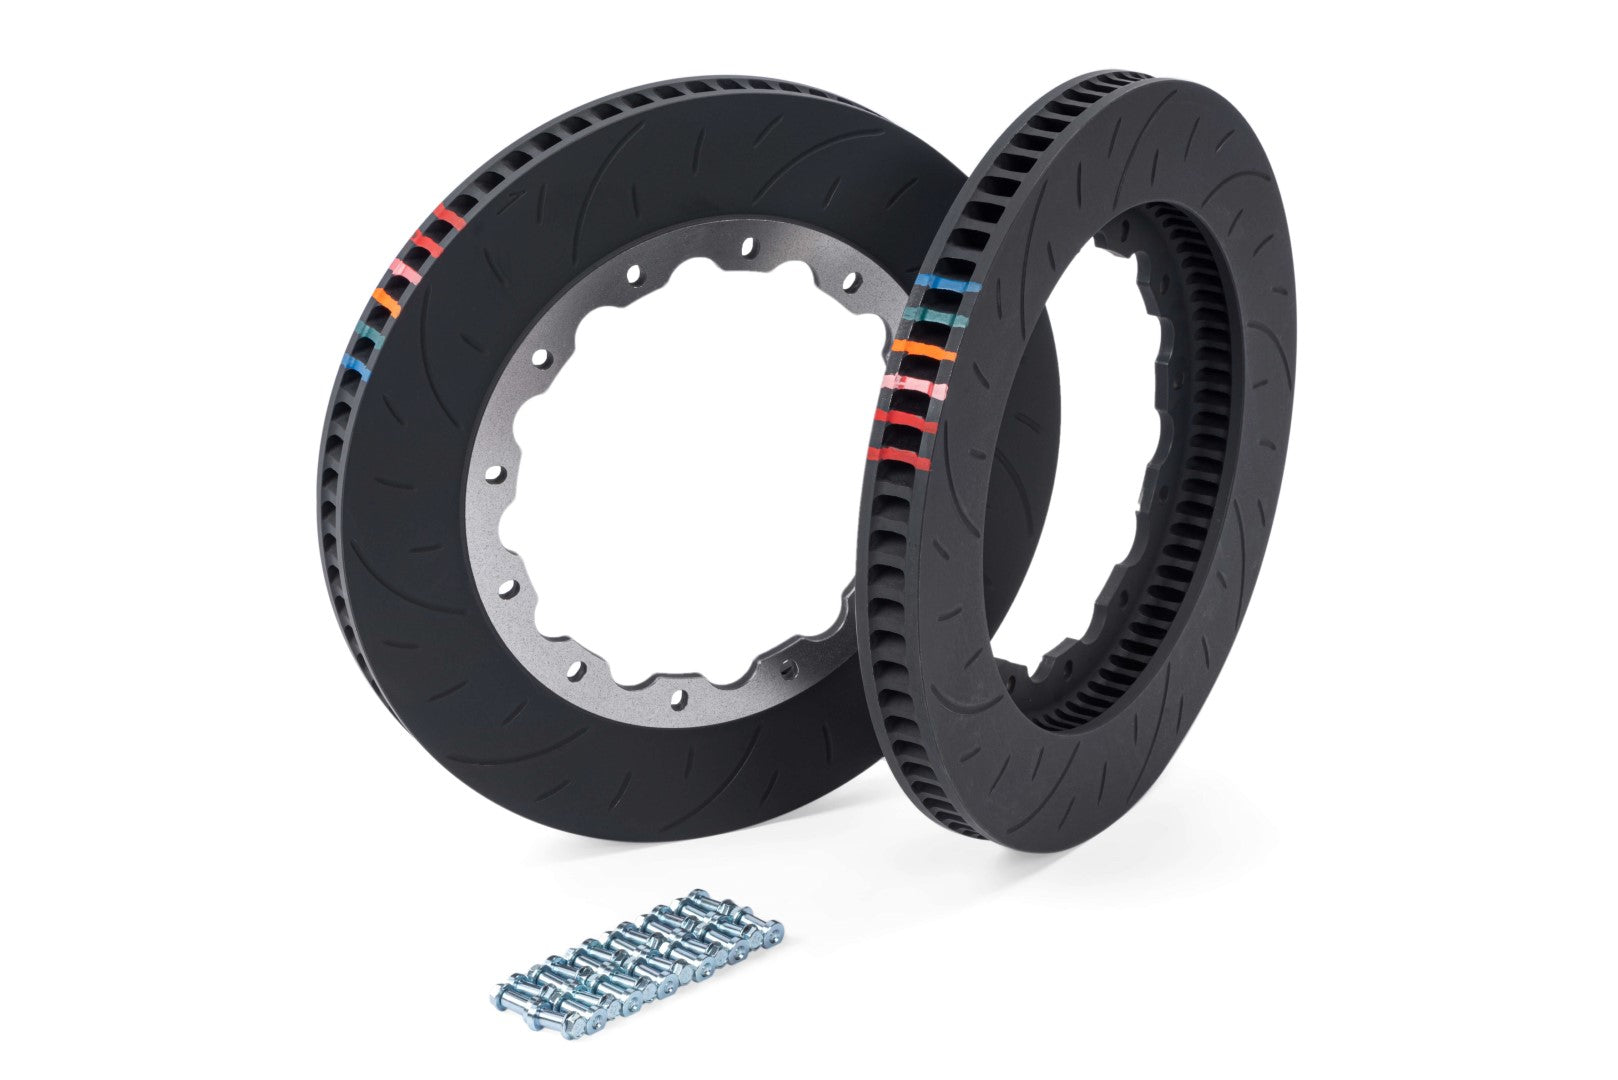 APR Brakes - 2 Piece Replacement Rings and Hardware For APR Brake Systems